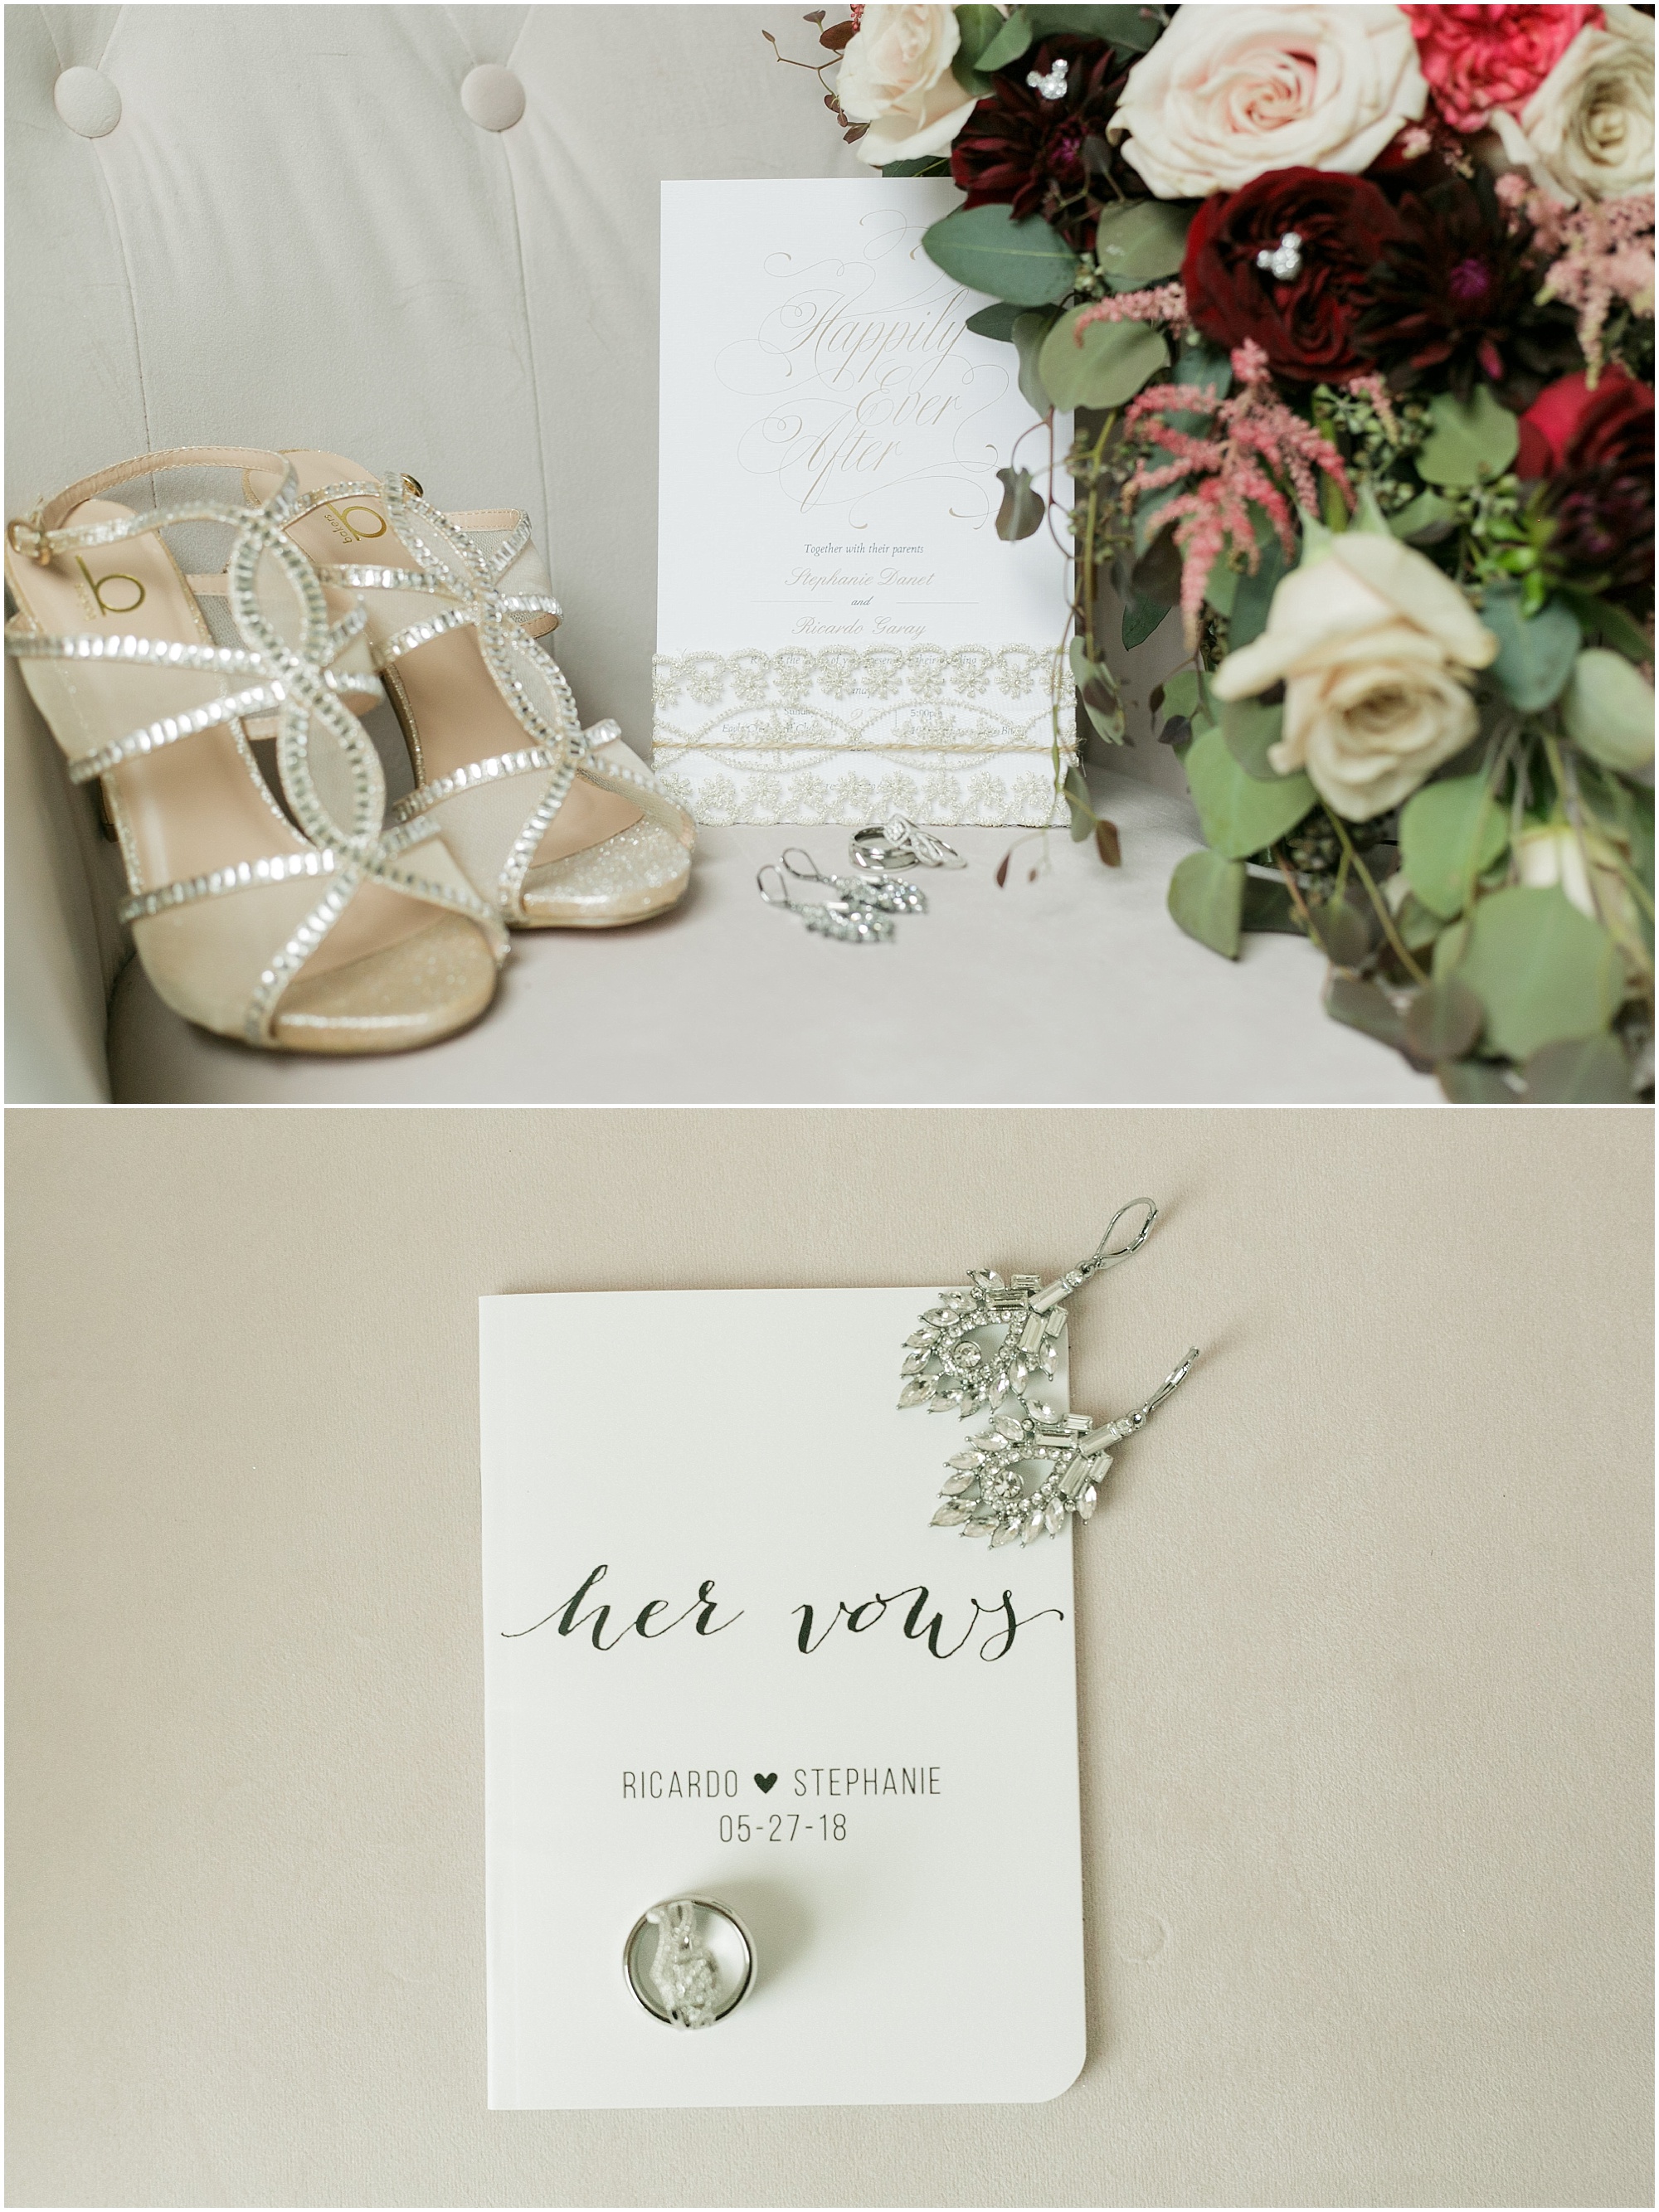 Wedding invitation along with bride's shoes, jewelry, flowers, and written vows. 